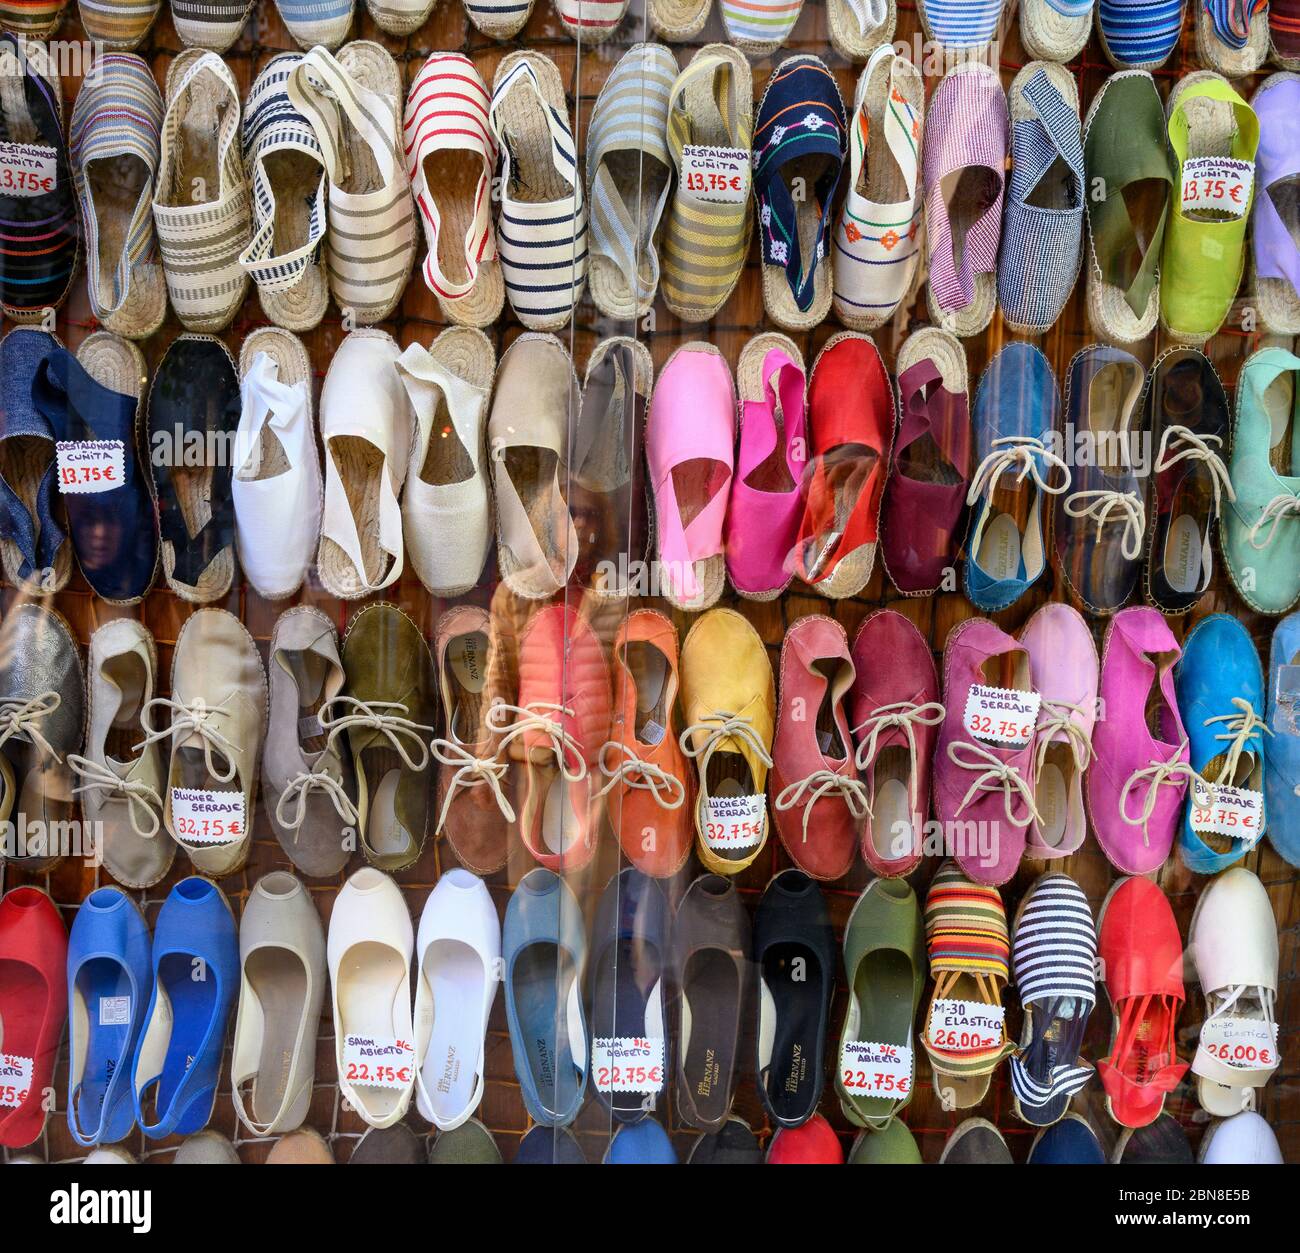 Espadrilles, rope-soled sandals, (alpargatas in Spanish) in a shop window in the Calle Toledo, central Madrid, Spain Stock Photo - Alamy